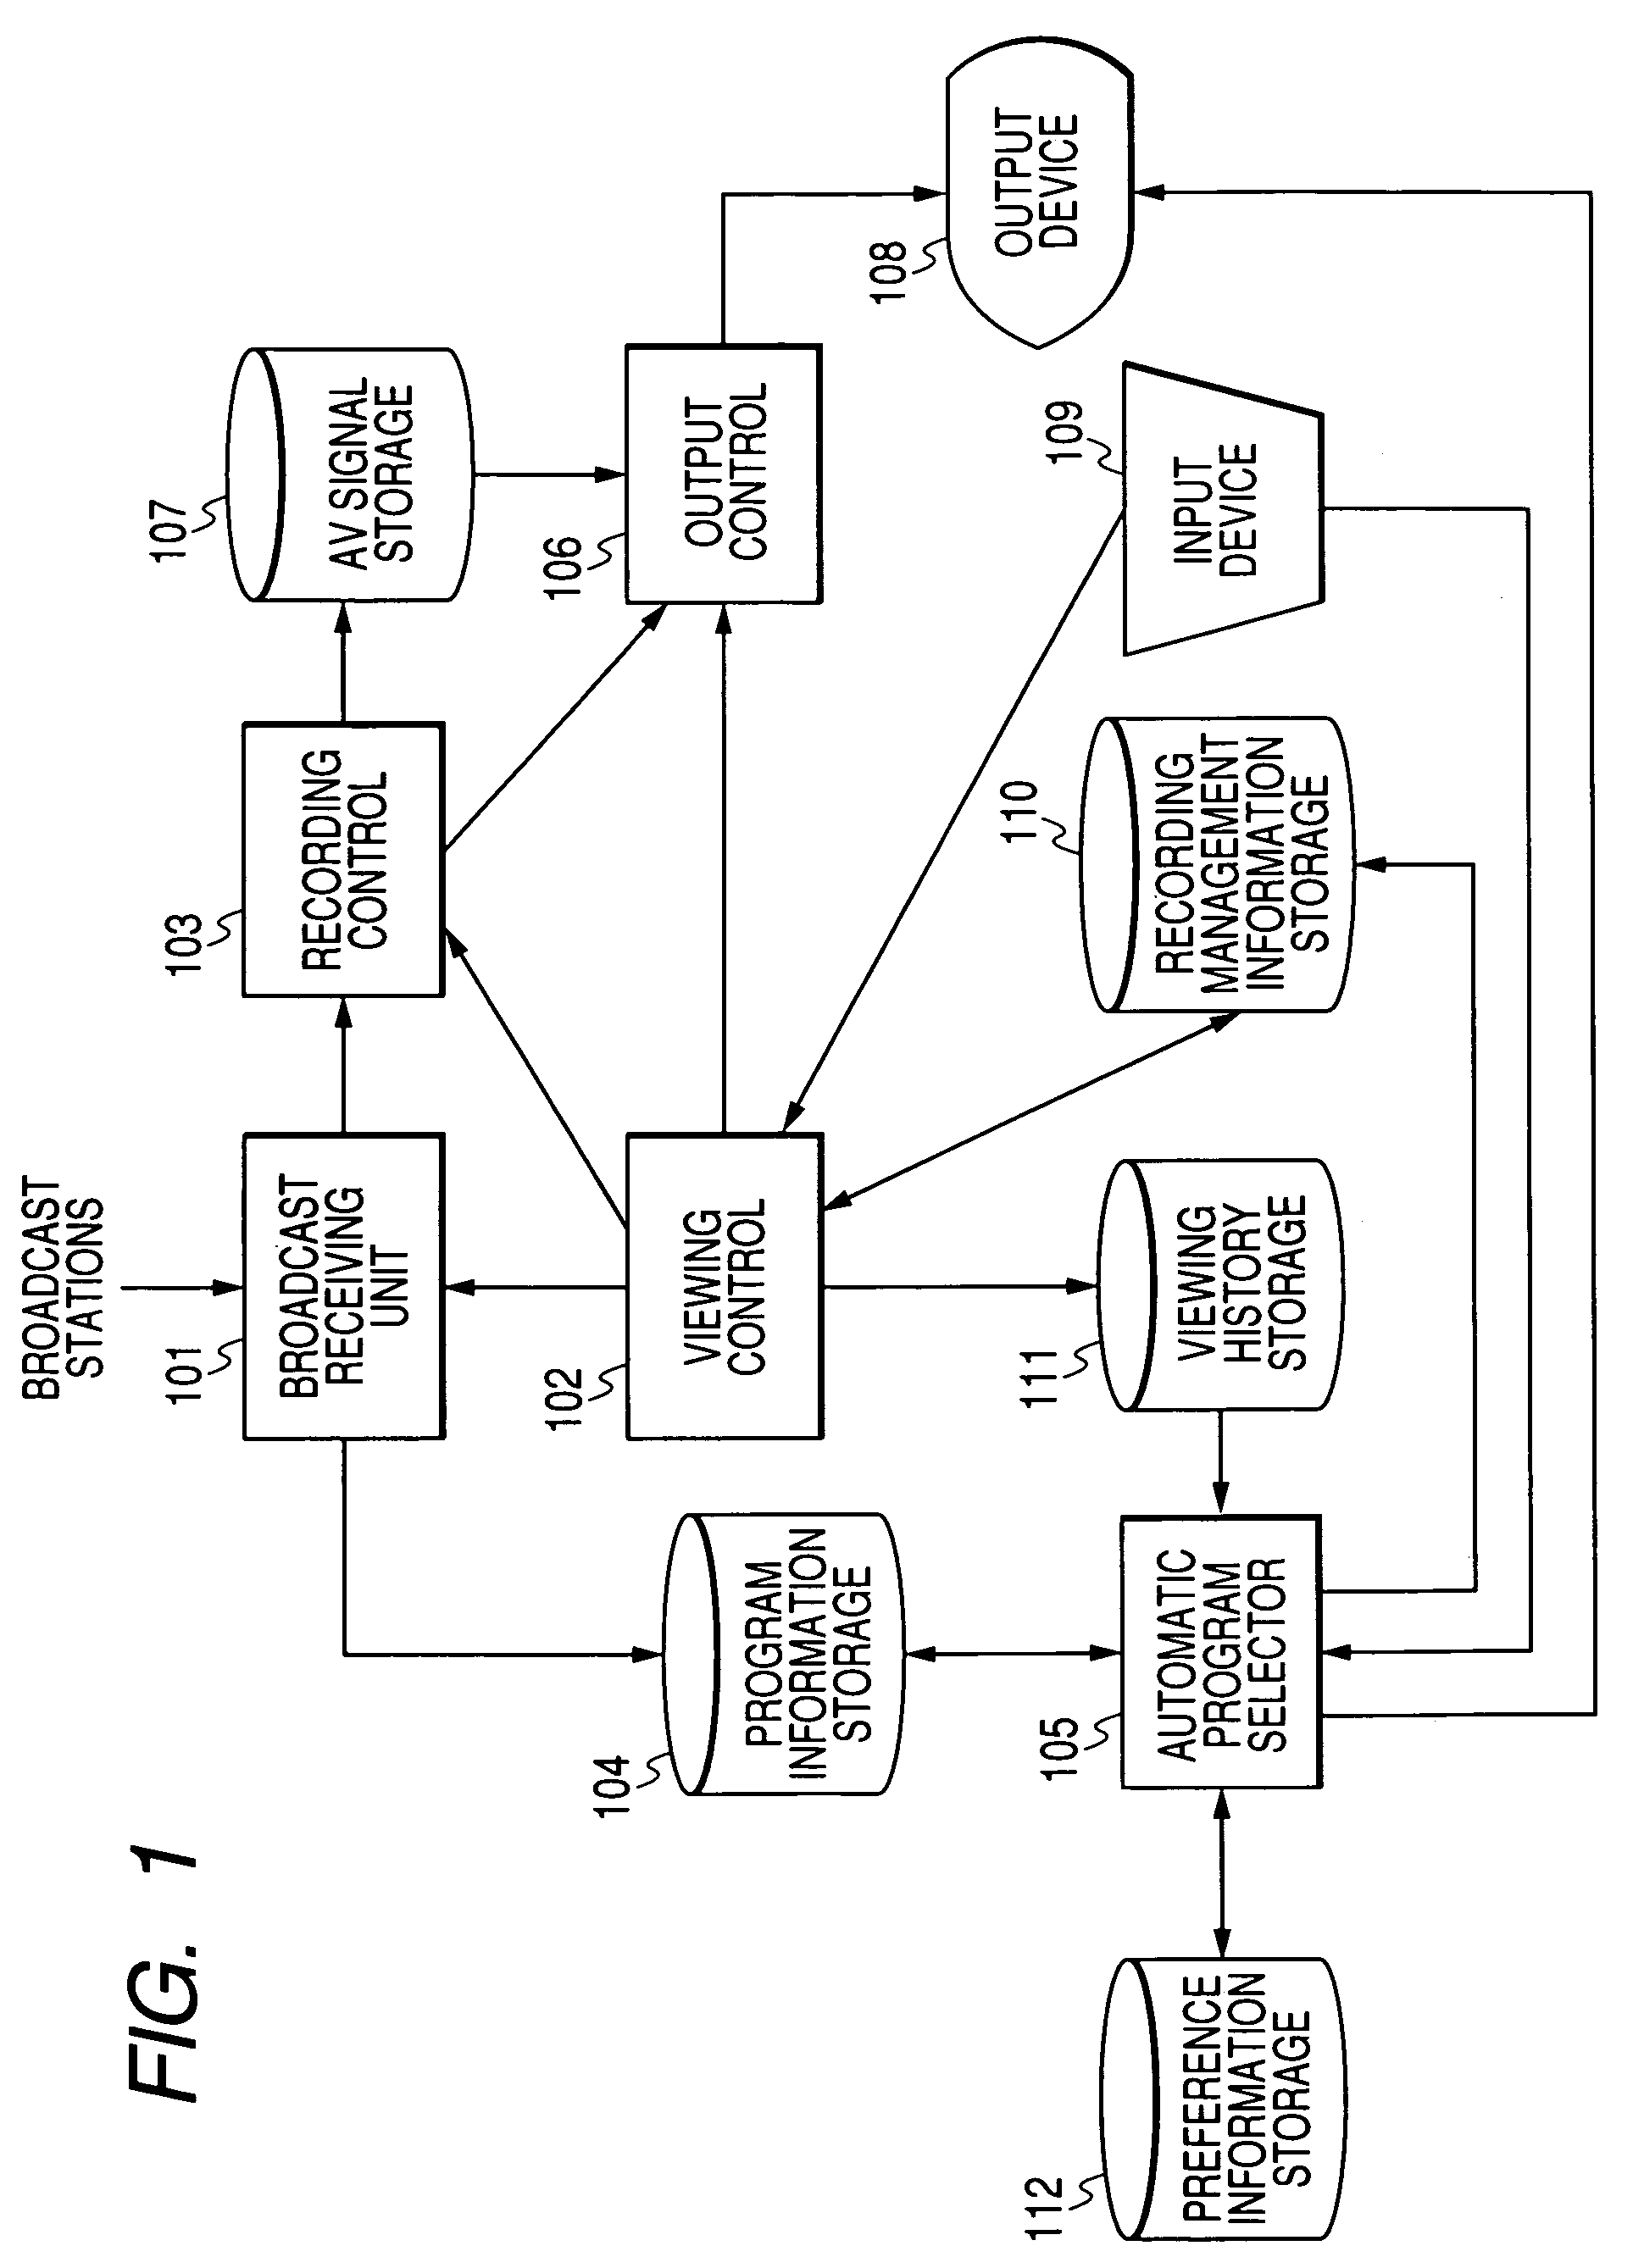 Method and apparatus for ranking broadcast programs